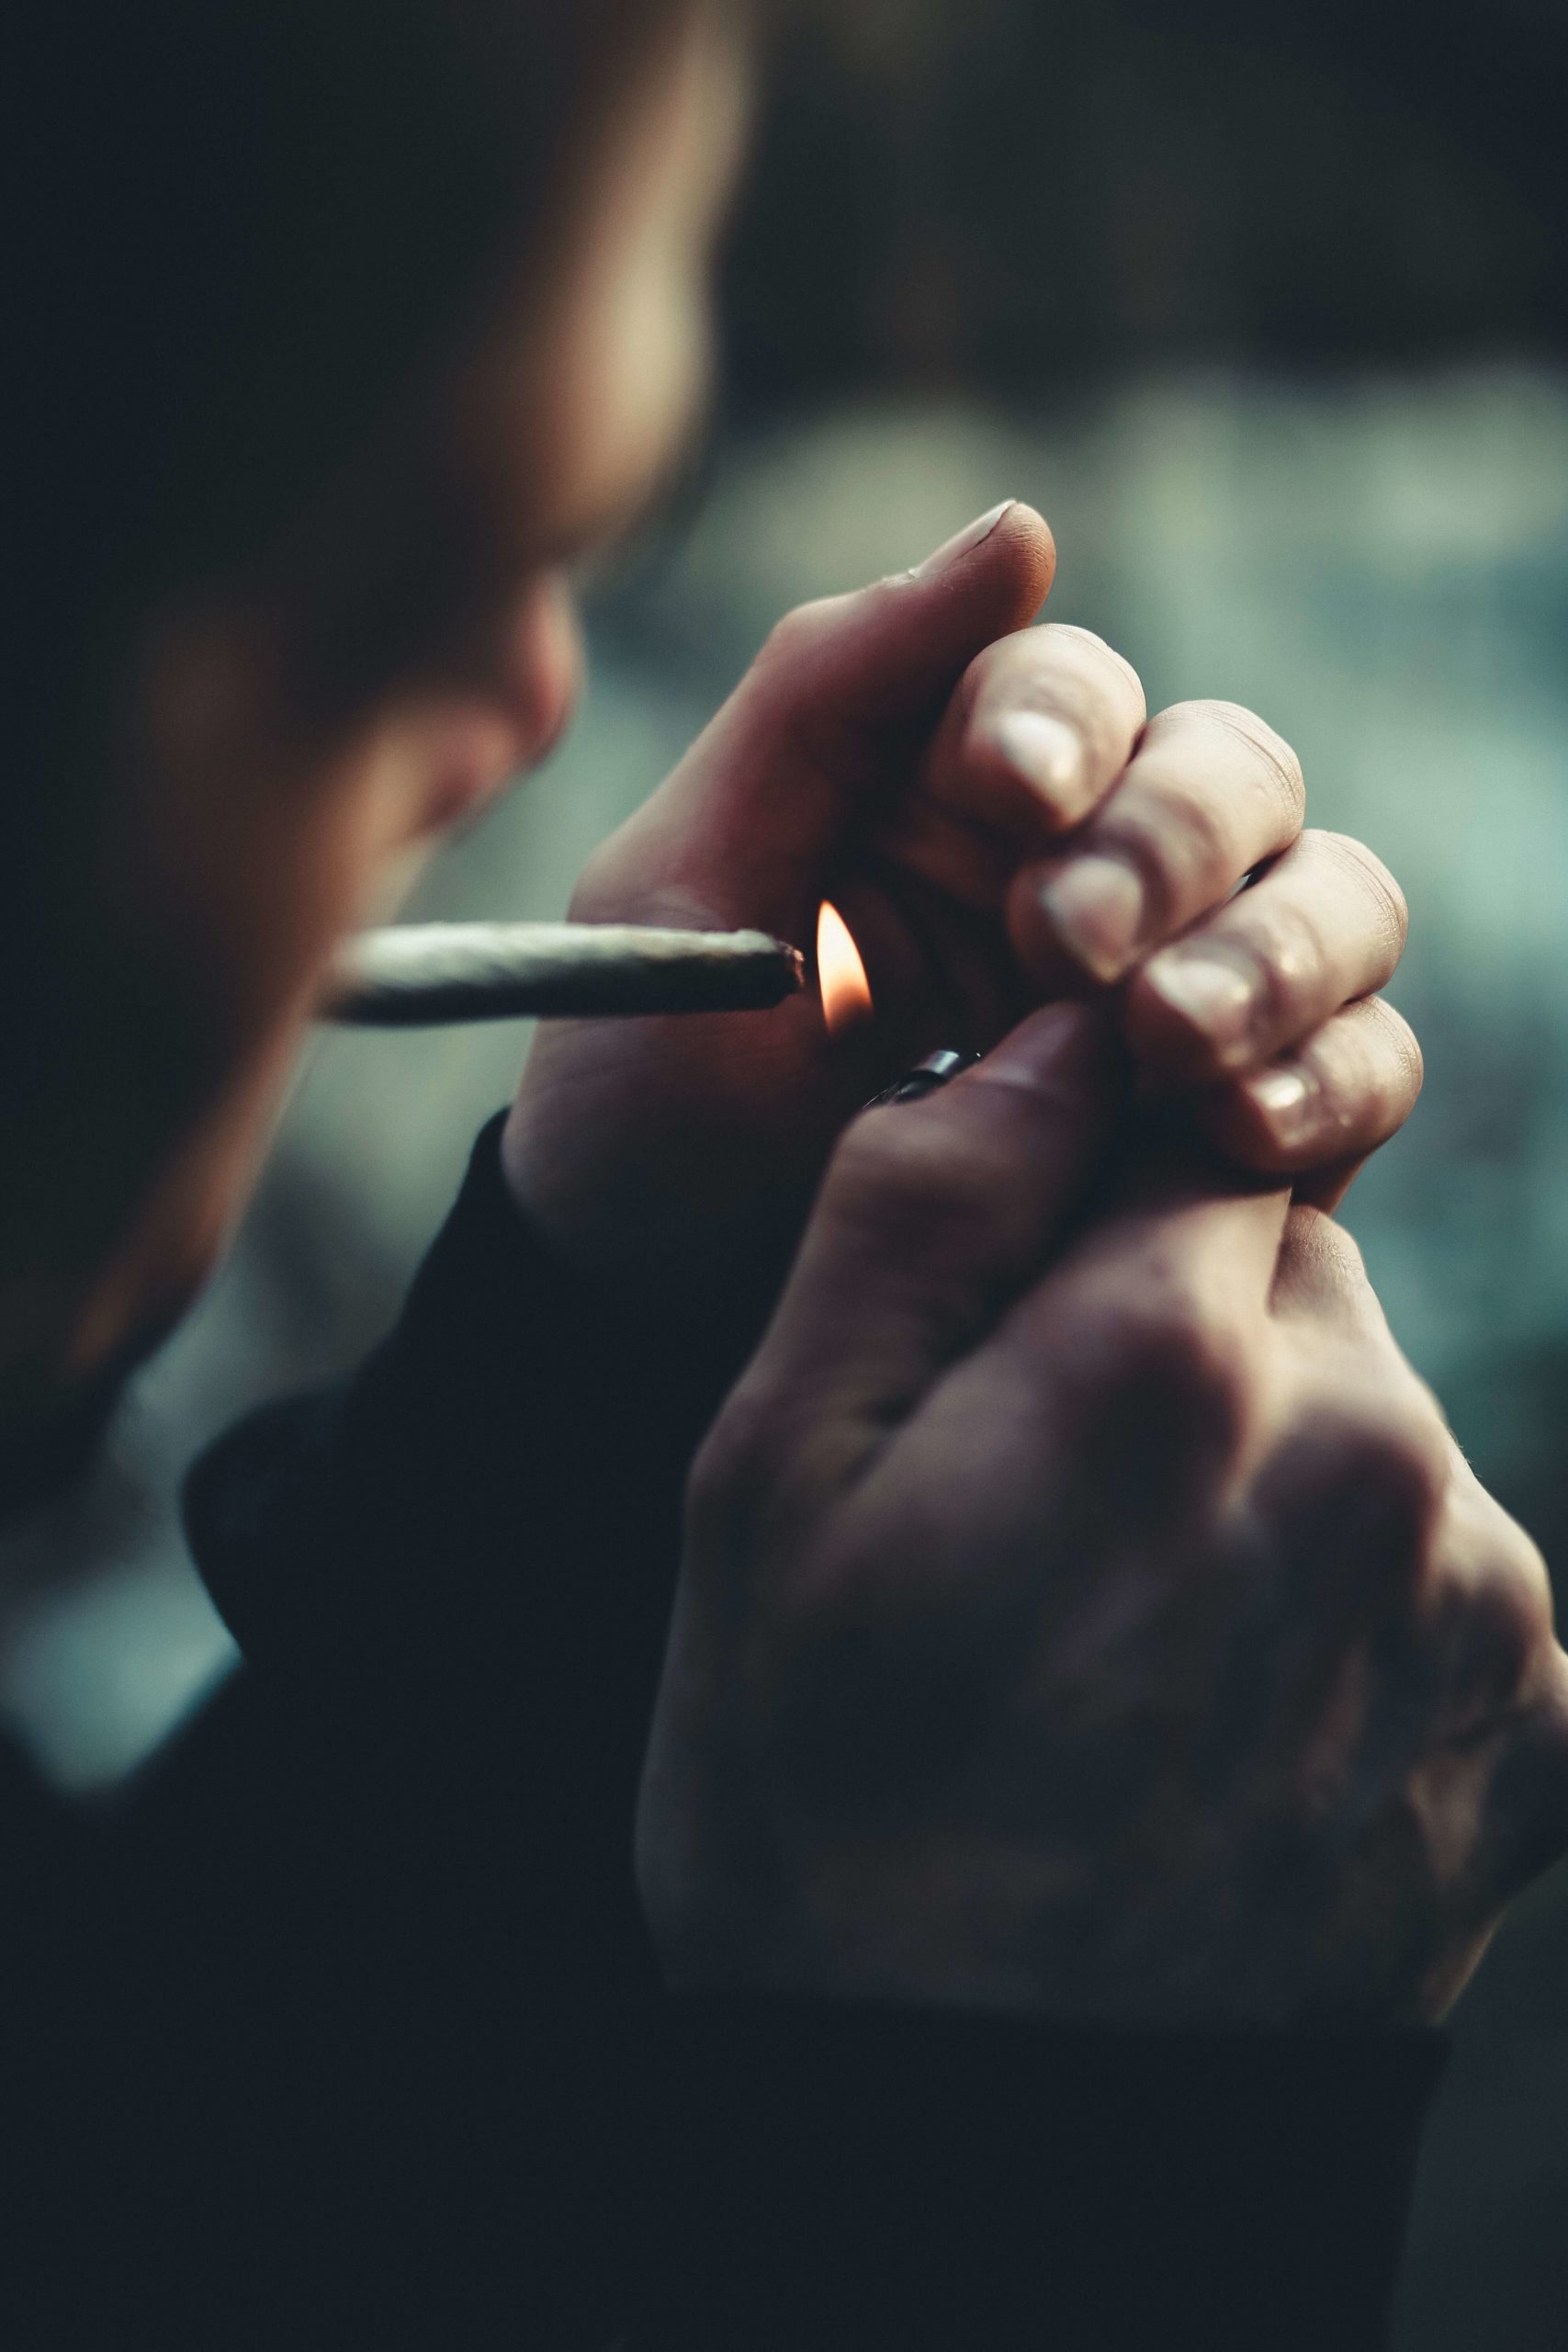 Cigar, Pipe, Cigarette or Joint: What’s Best To Smoke Before Bed?